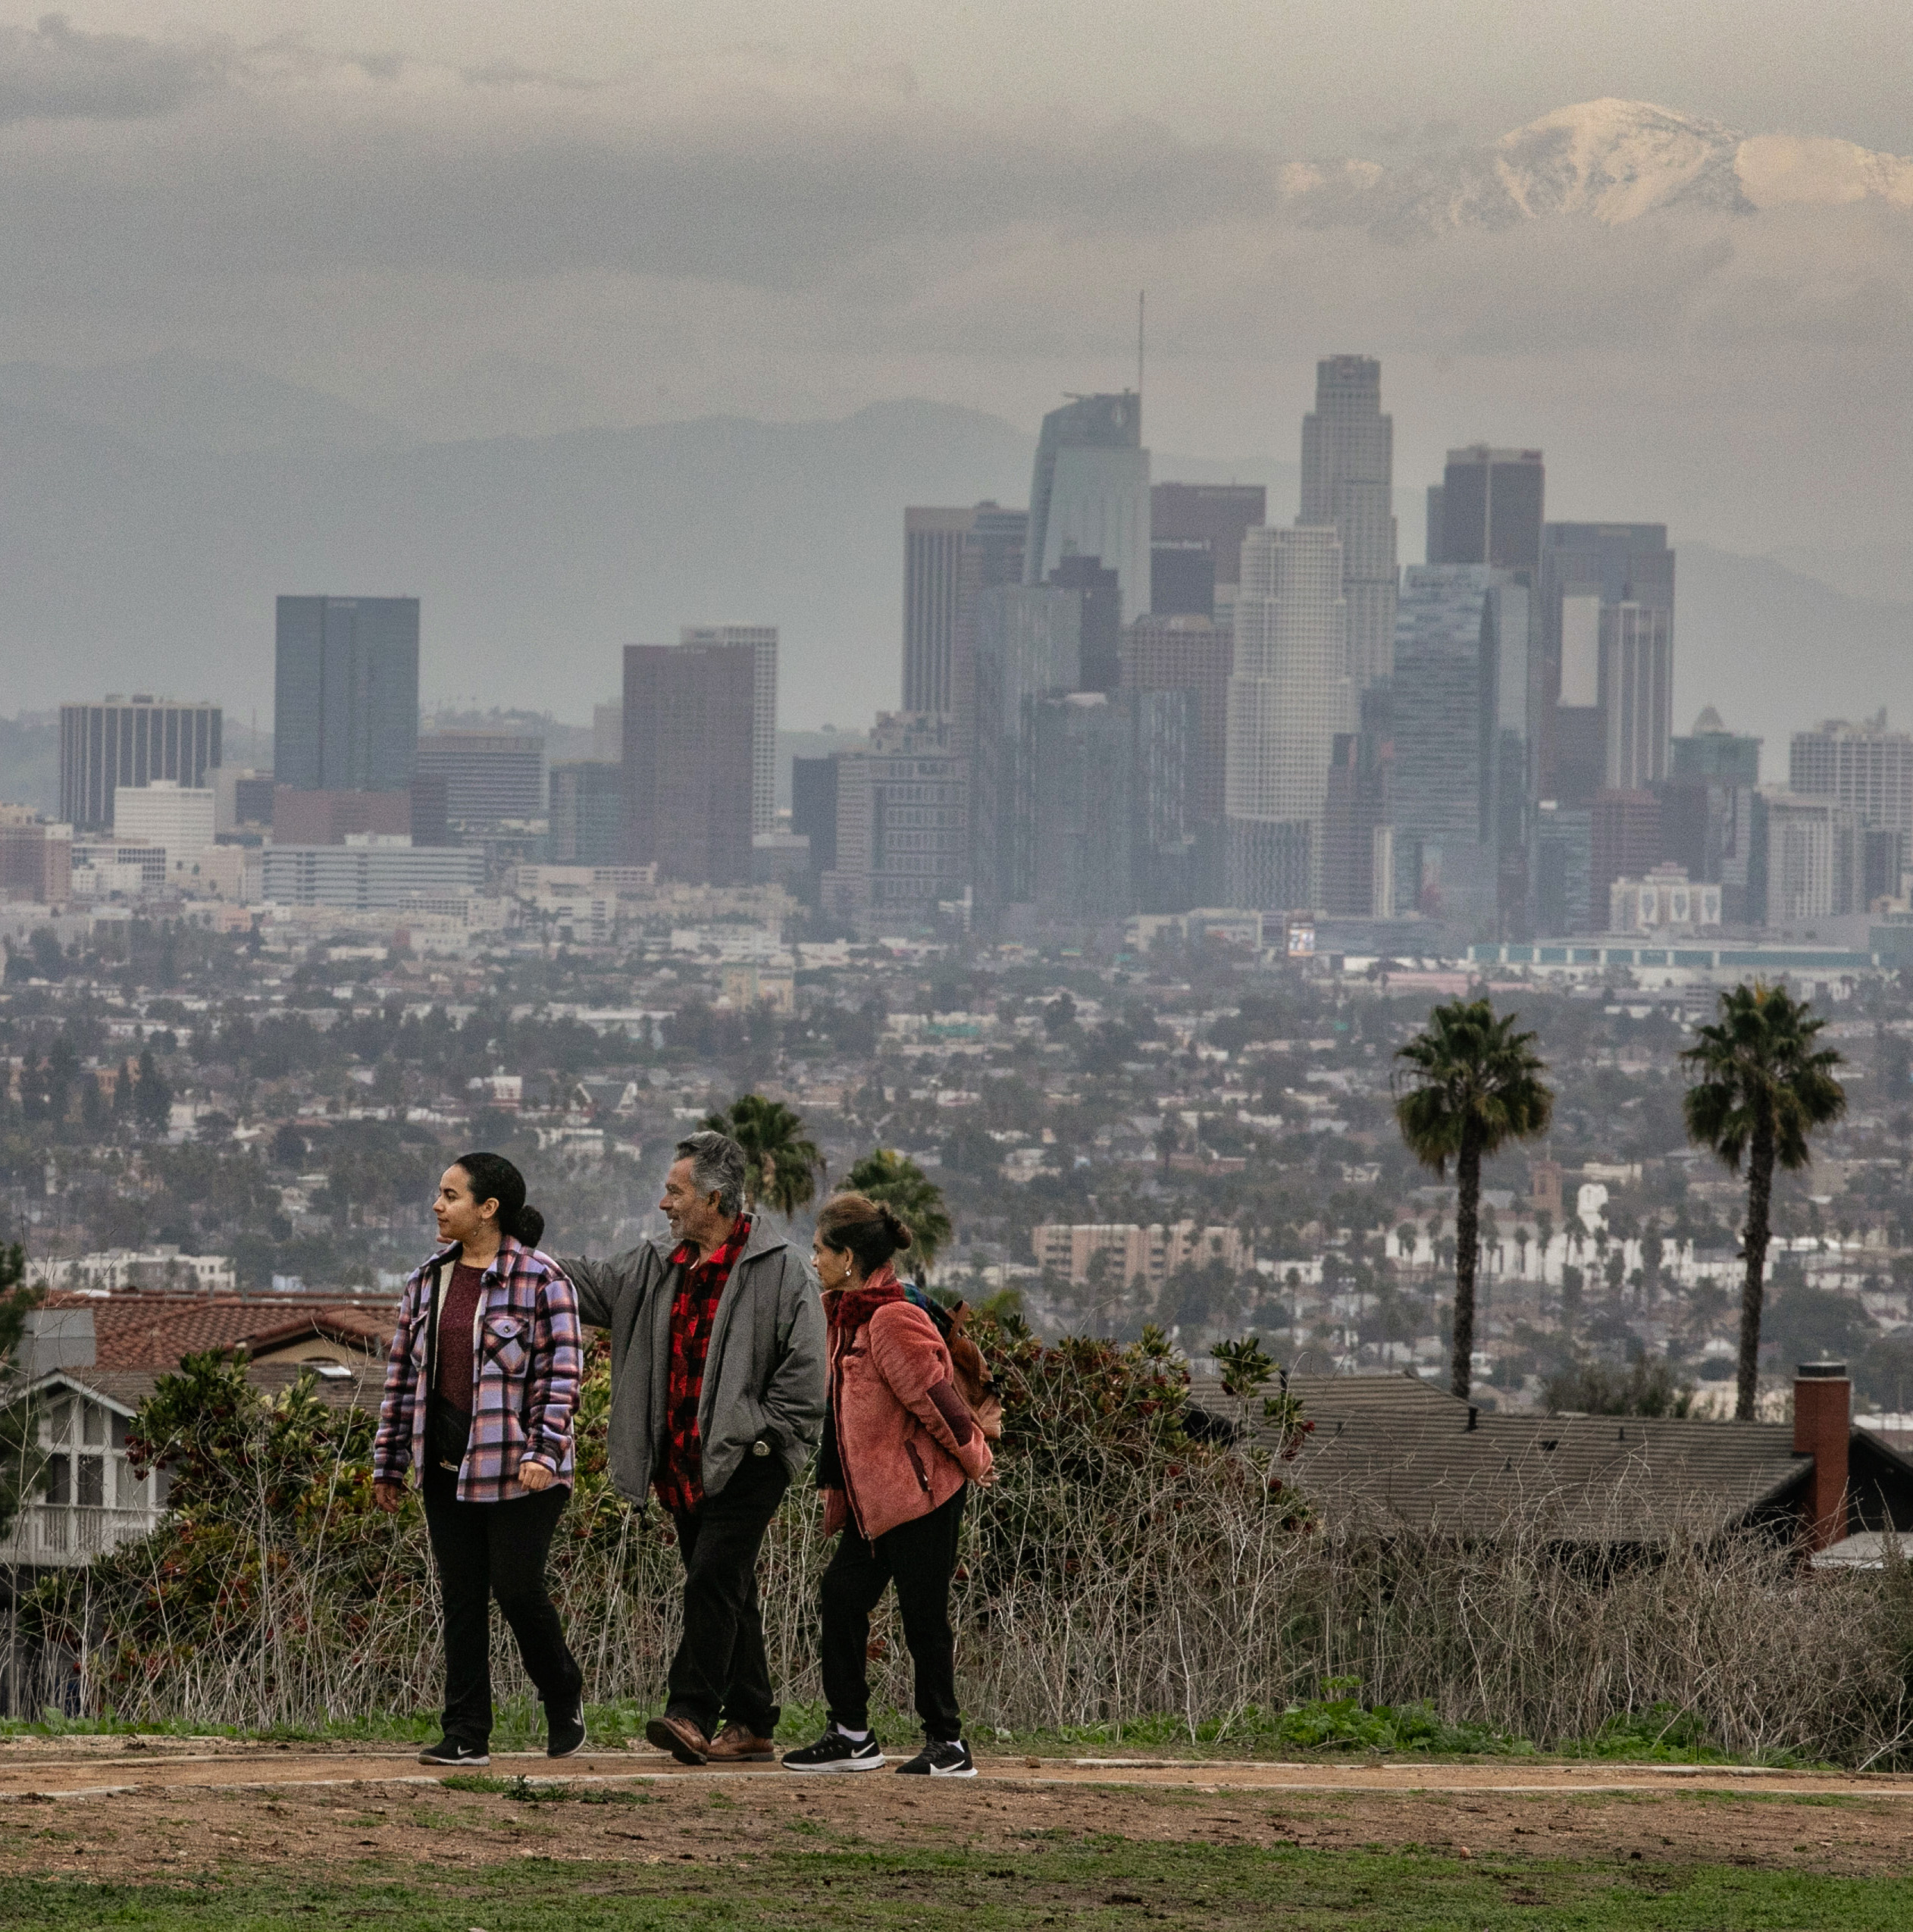 People out amid the winter gloom at L.A.'s Kenneth Hahn State Recreation Area on Jan. 2.